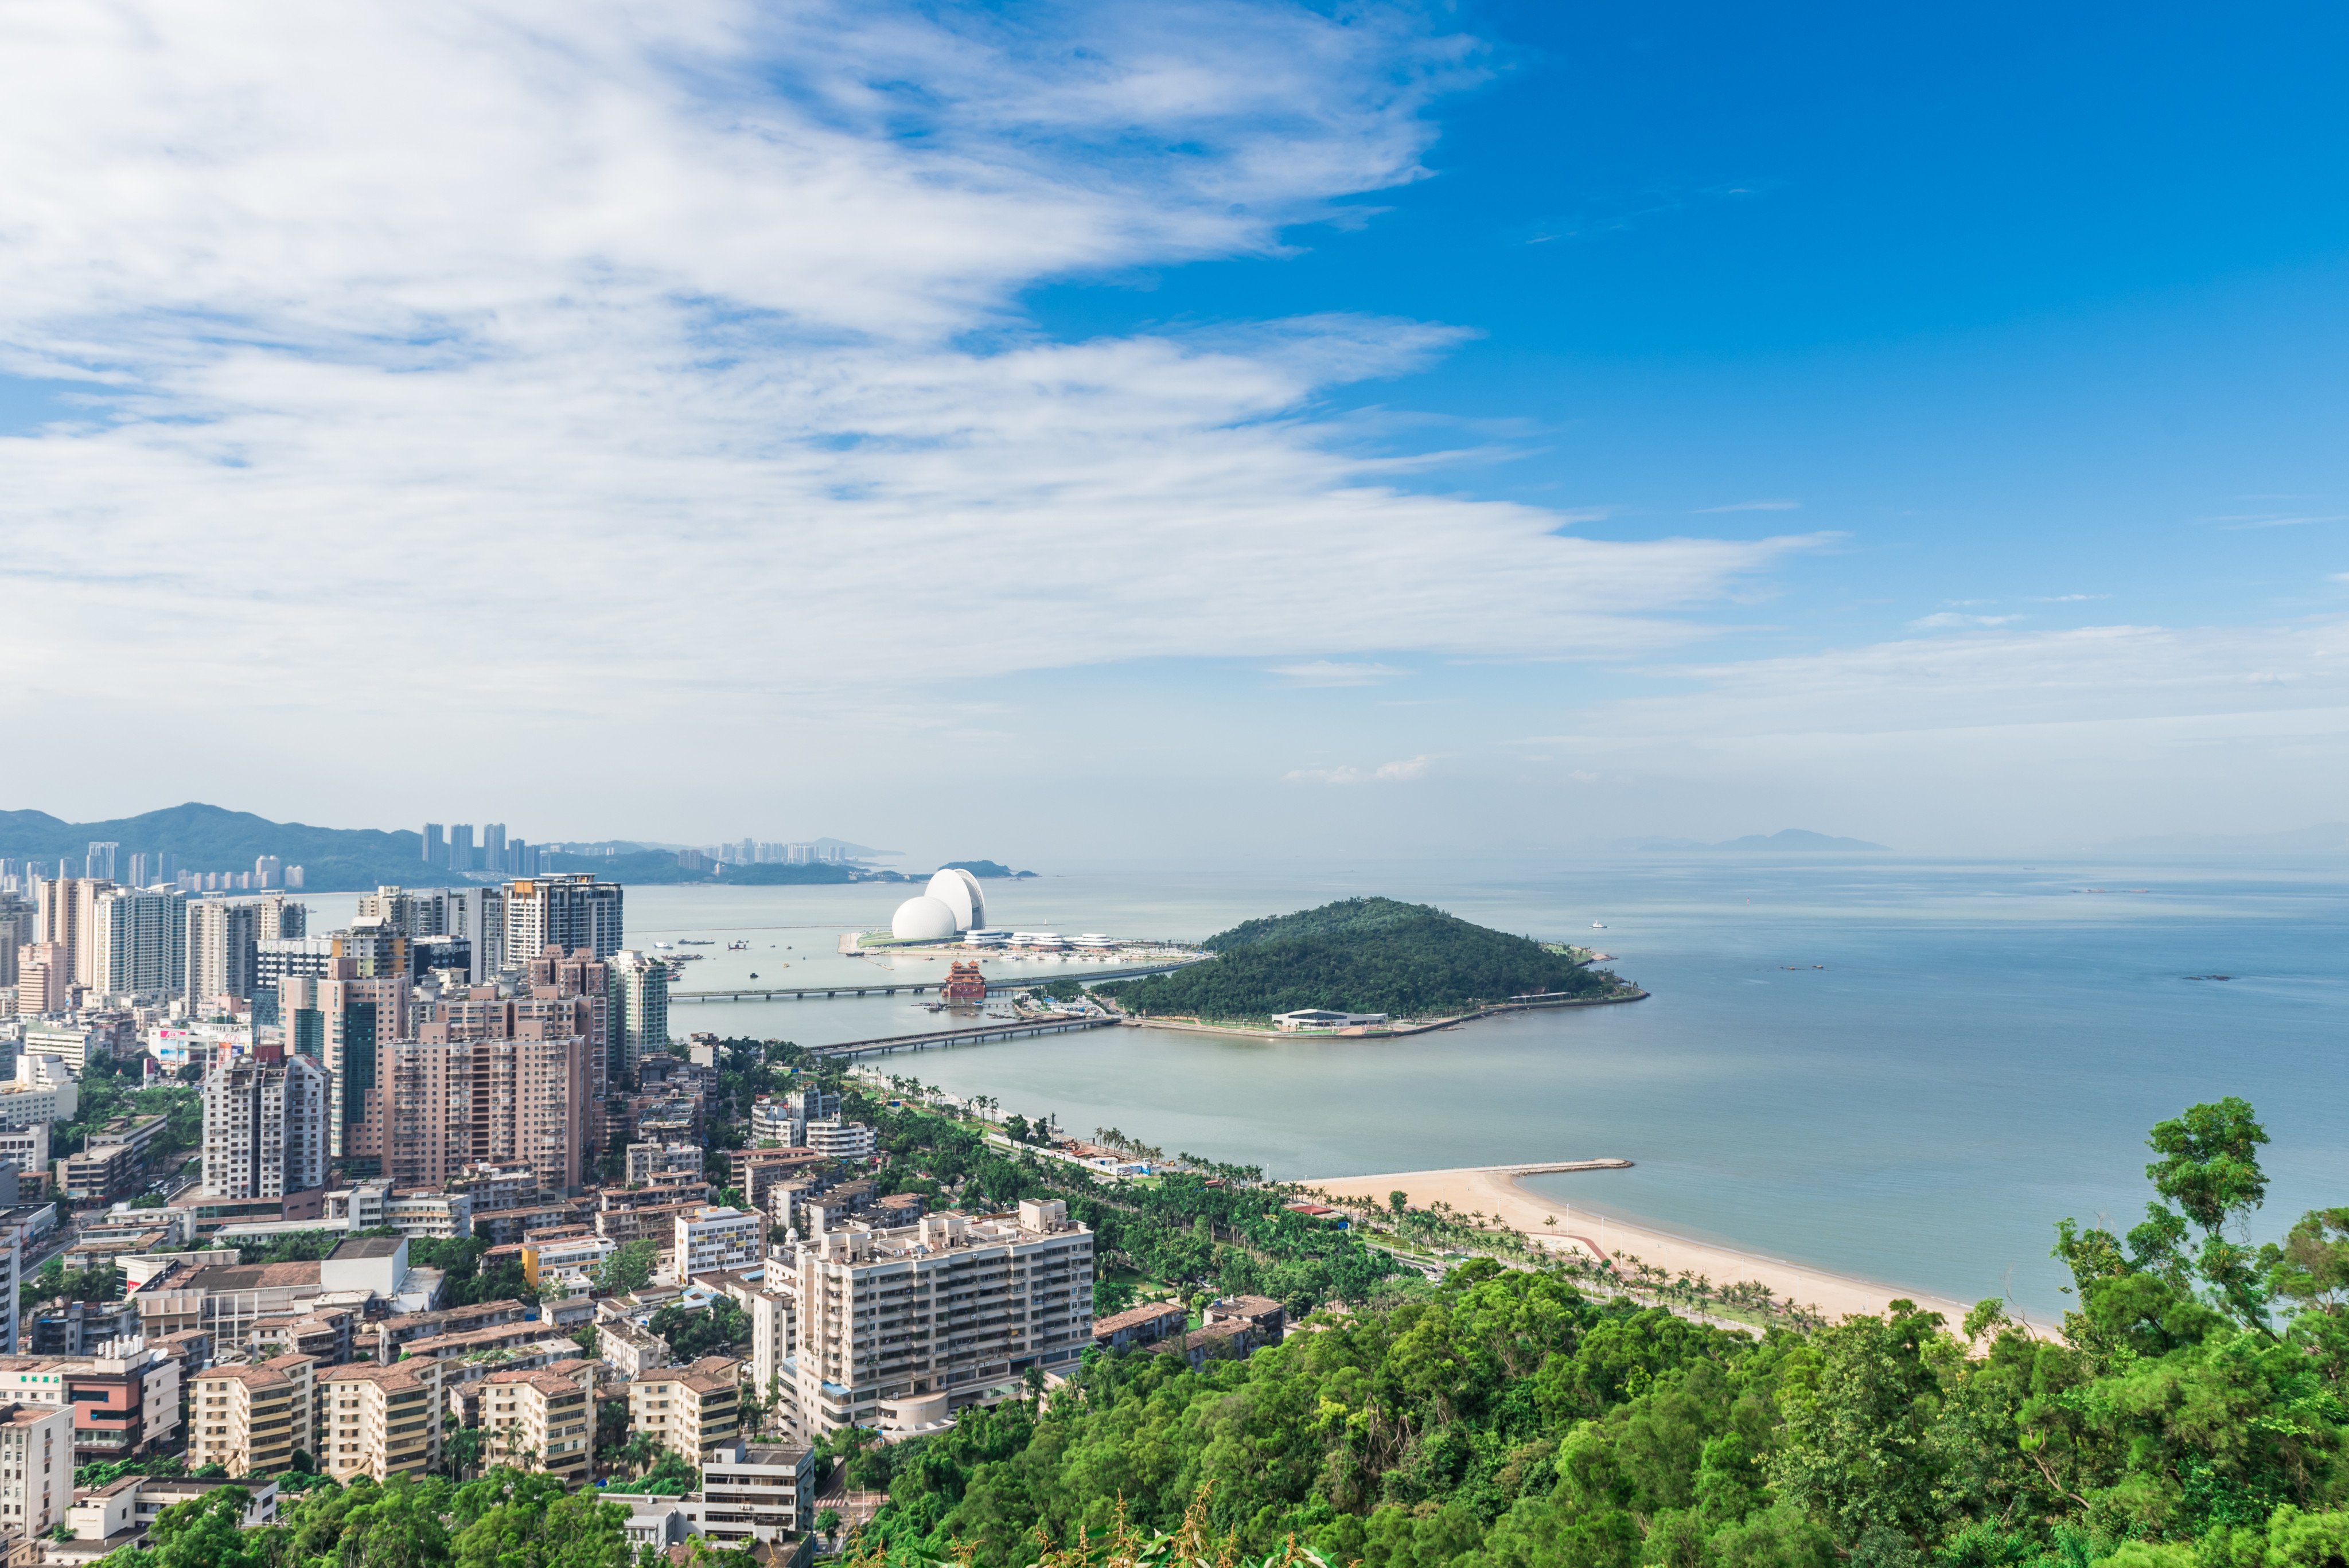 Radiation readings in Zhuhai, a coastal city in China’s southern Guangdong province, remain within the normal range, according to its ecological environment bureau. Photo: Shutterstock